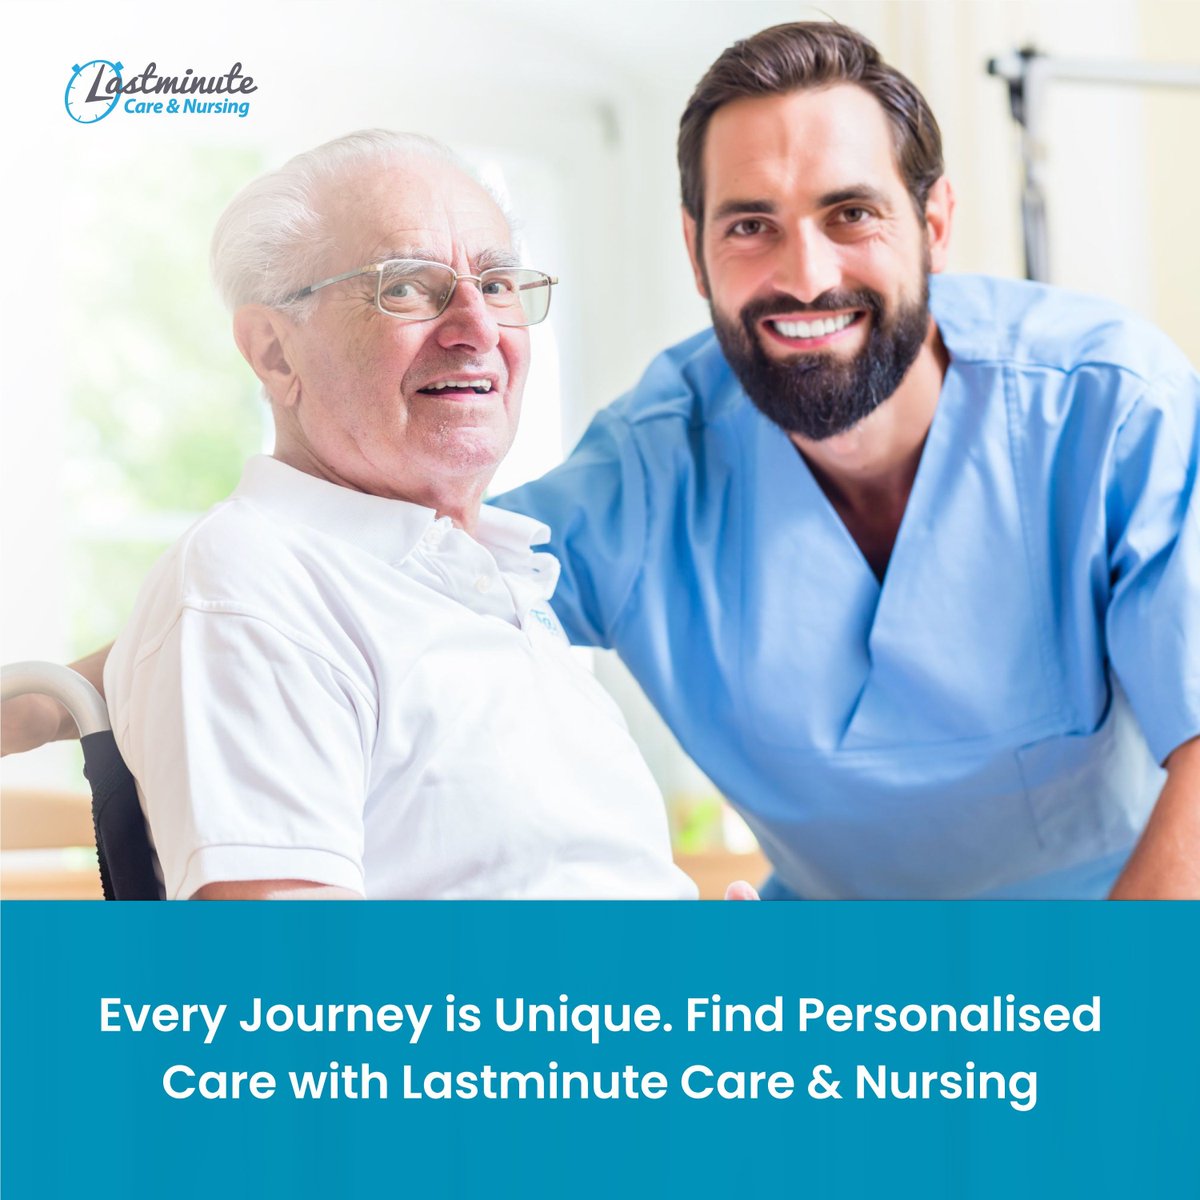 For all enquiries, please email us at md@lastminutenursing.com or call us on 0151 691 4933 and ask for Trish or Sharla.

#lastminutenursing #privatehomecare #liveincare #homecareassistant #careservices #homehelp #careassistant #supportworker #seniorcare #seniorcaregiver #wirral